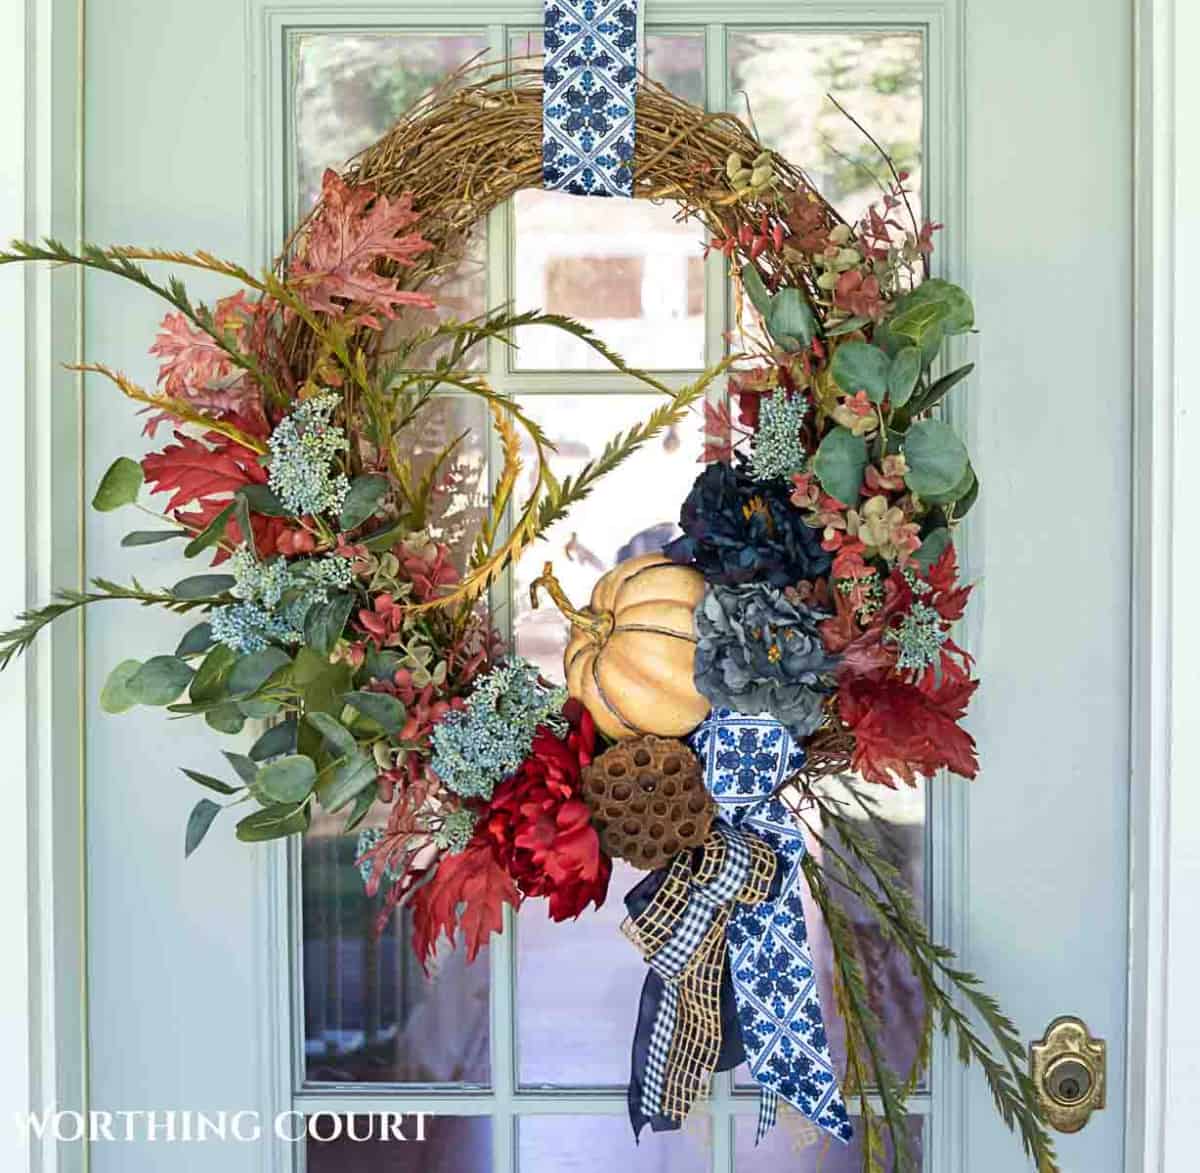 fall wreath with burgundy hydrangeas and other blue flowers and greenery